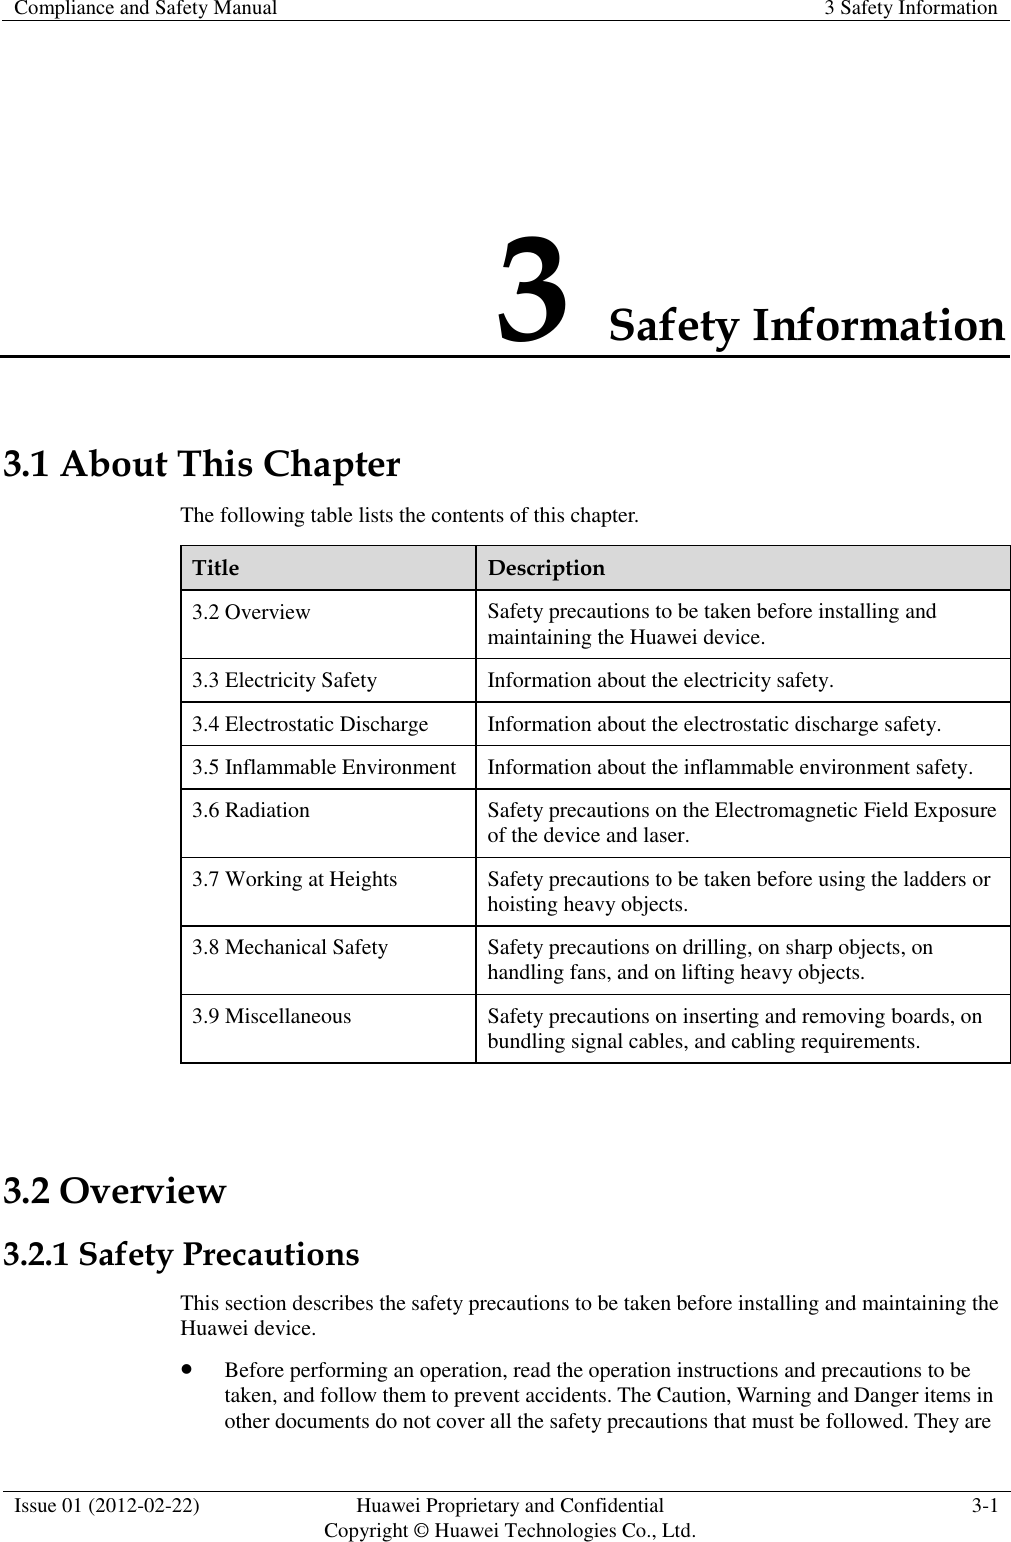 Compliance and Safety Manual 3 Safety Information  Issue 01 (2012-02-22) Huawei Proprietary and Confidential           Copyright © Huawei Technologies Co., Ltd. 3-1  3 Safety Information 3.1 About This Chapter The following table lists the contents of this chapter. Title Description 3.2 Overview Safety precautions to be taken before installing and maintaining the Huawei device. 3.3 Electricity Safety Information about the electricity safety. 3.4 Electrostatic Discharge Information about the electrostatic discharge safety. 3.5 Inflammable Environment Information about the inflammable environment safety. 3.6 Radiation Safety precautions on the Electromagnetic Field Exposure of the device and laser. 3.7 Working at Heights Safety precautions to be taken before using the ladders or hoisting heavy objects. 3.8 Mechanical Safety Safety precautions on drilling, on sharp objects, on handling fans, and on lifting heavy objects. 3.9 Miscellaneous Safety precautions on inserting and removing boards, on bundling signal cables, and cabling requirements.  3.2 Overview 3.2.1 Safety Precautions This section describes the safety precautions to be taken before installing and maintaining the Huawei device.  Before performing an operation, read the operation instructions and precautions to be taken, and follow them to prevent accidents. The Caution, Warning and Danger items in other documents do not cover all the safety precautions that must be followed. They are 